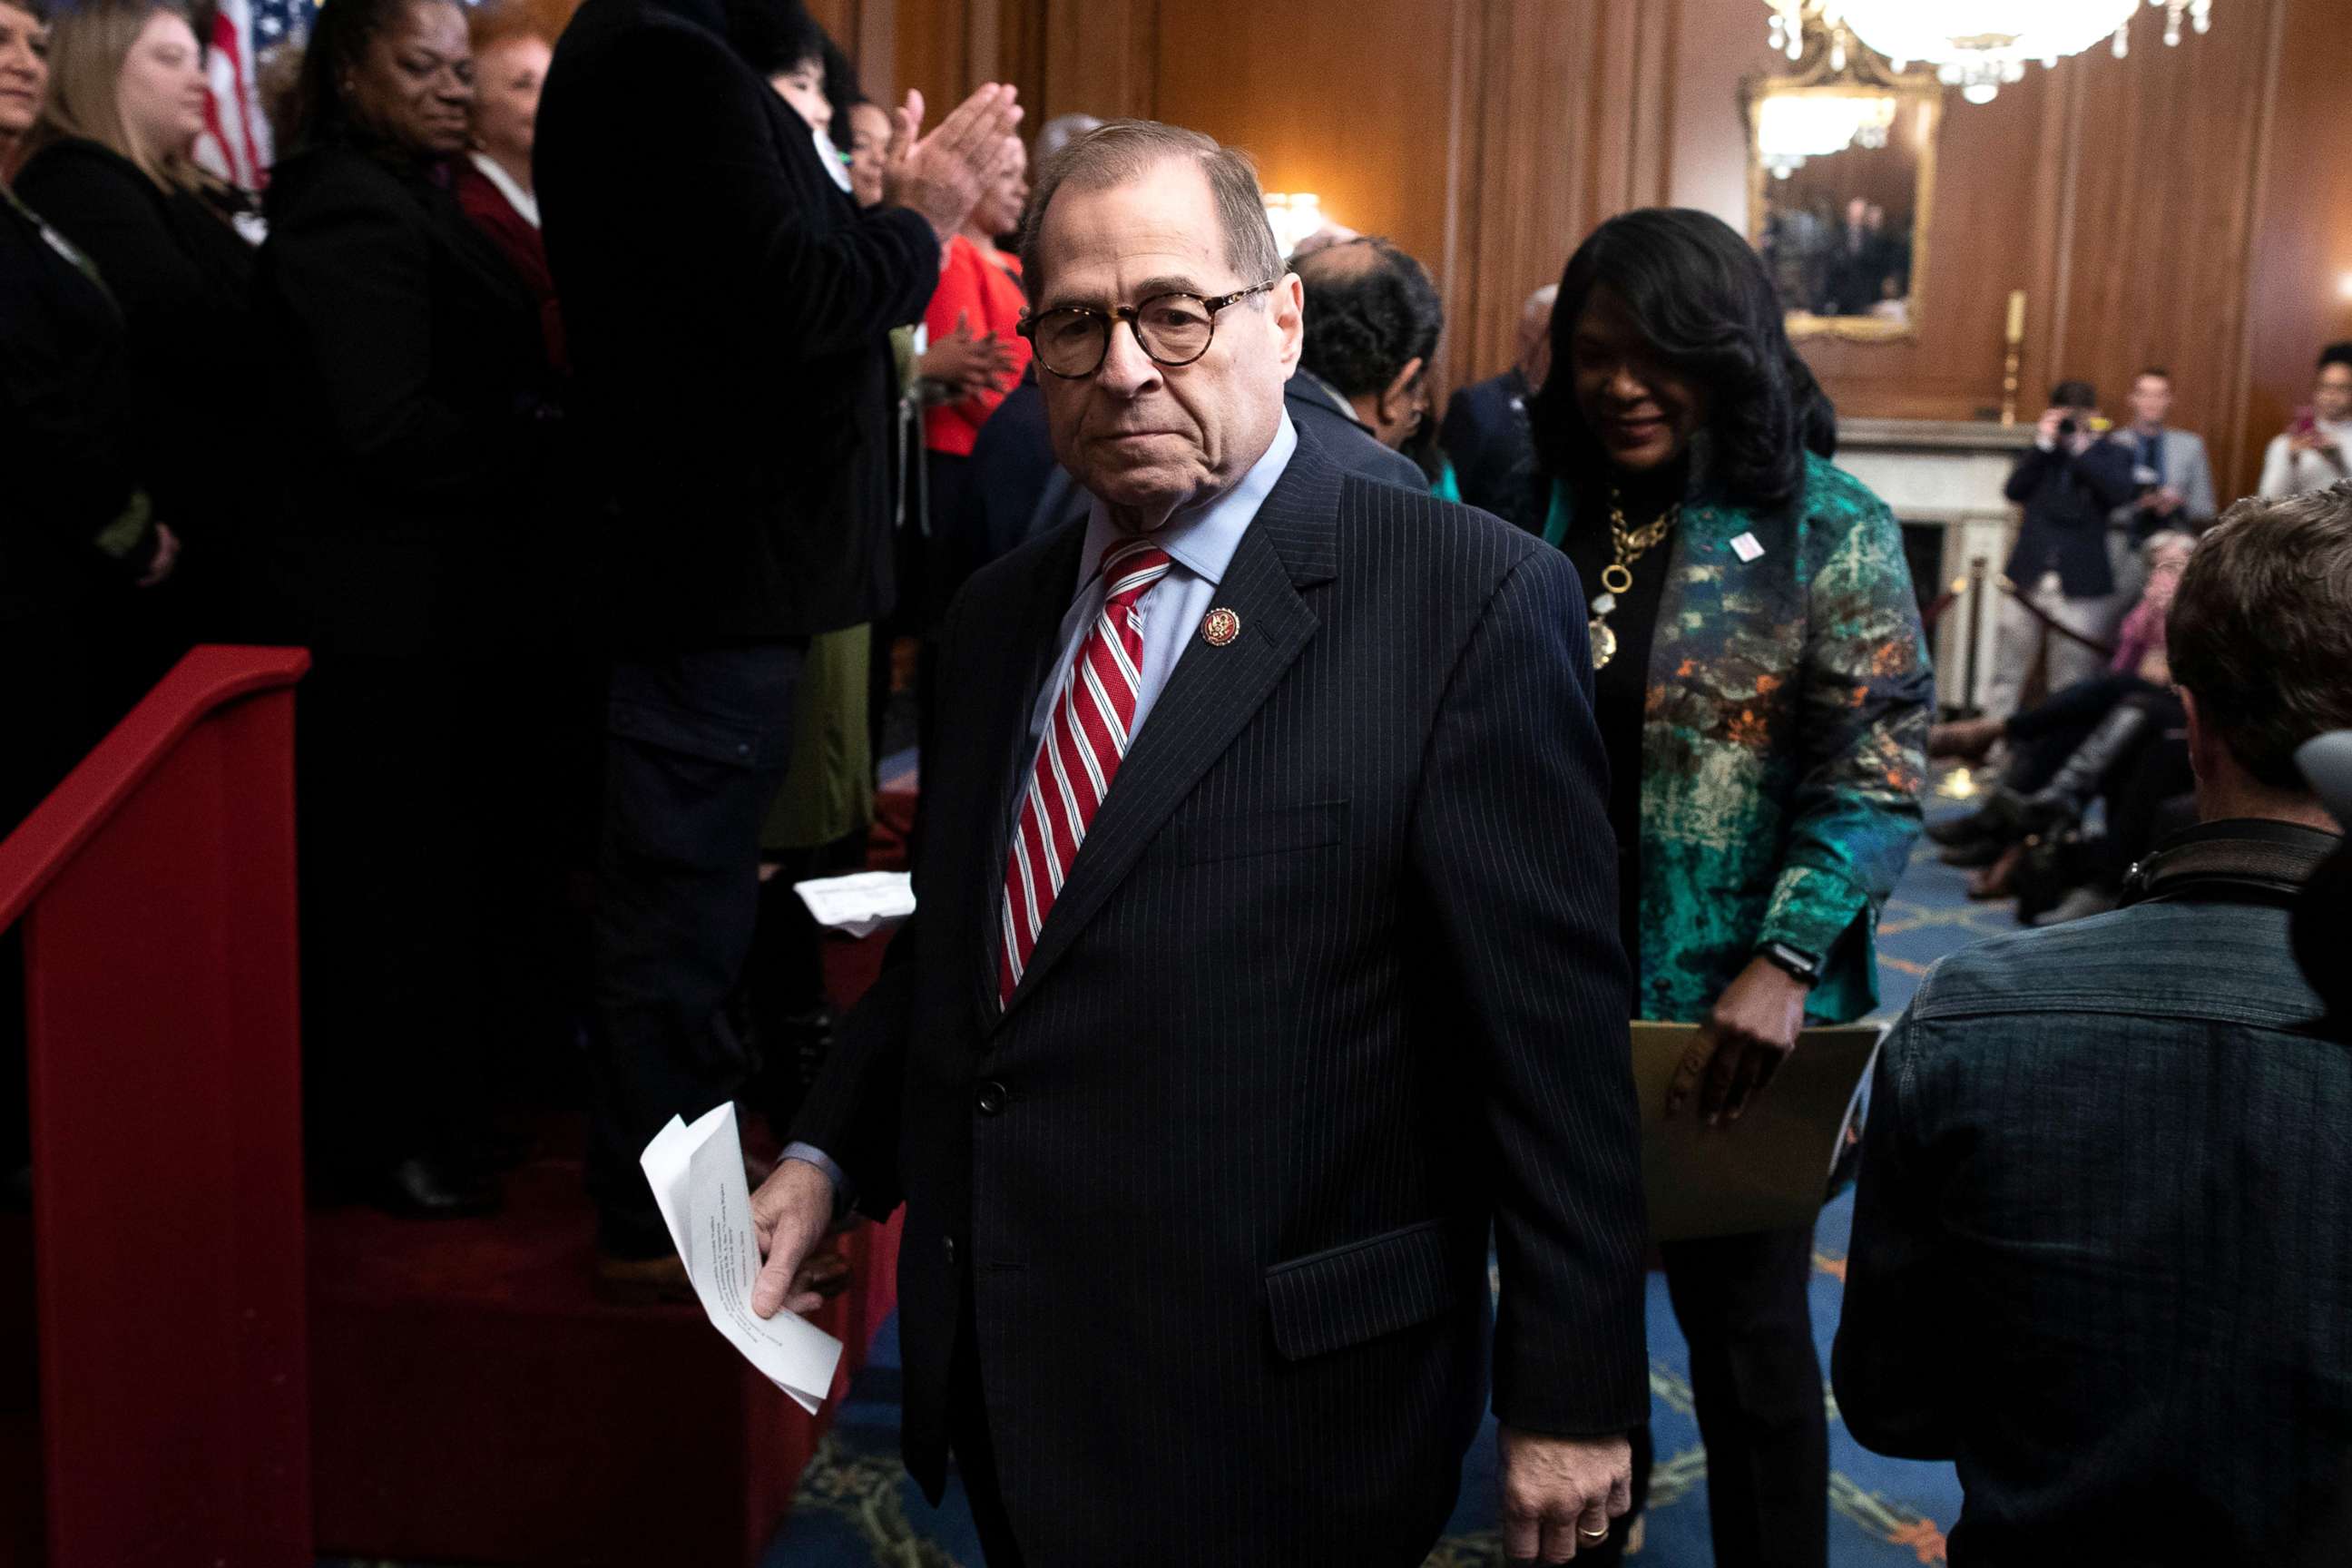 PHOTO: Chairman of the House Judiciary Committee Jerry Nadler departs from a press event held by Democratic lawmakers ahead of the vote on the Voting Rights Advancement Act in the US House of Representatives on Capitol Hill, Dec. 6, 2019. 